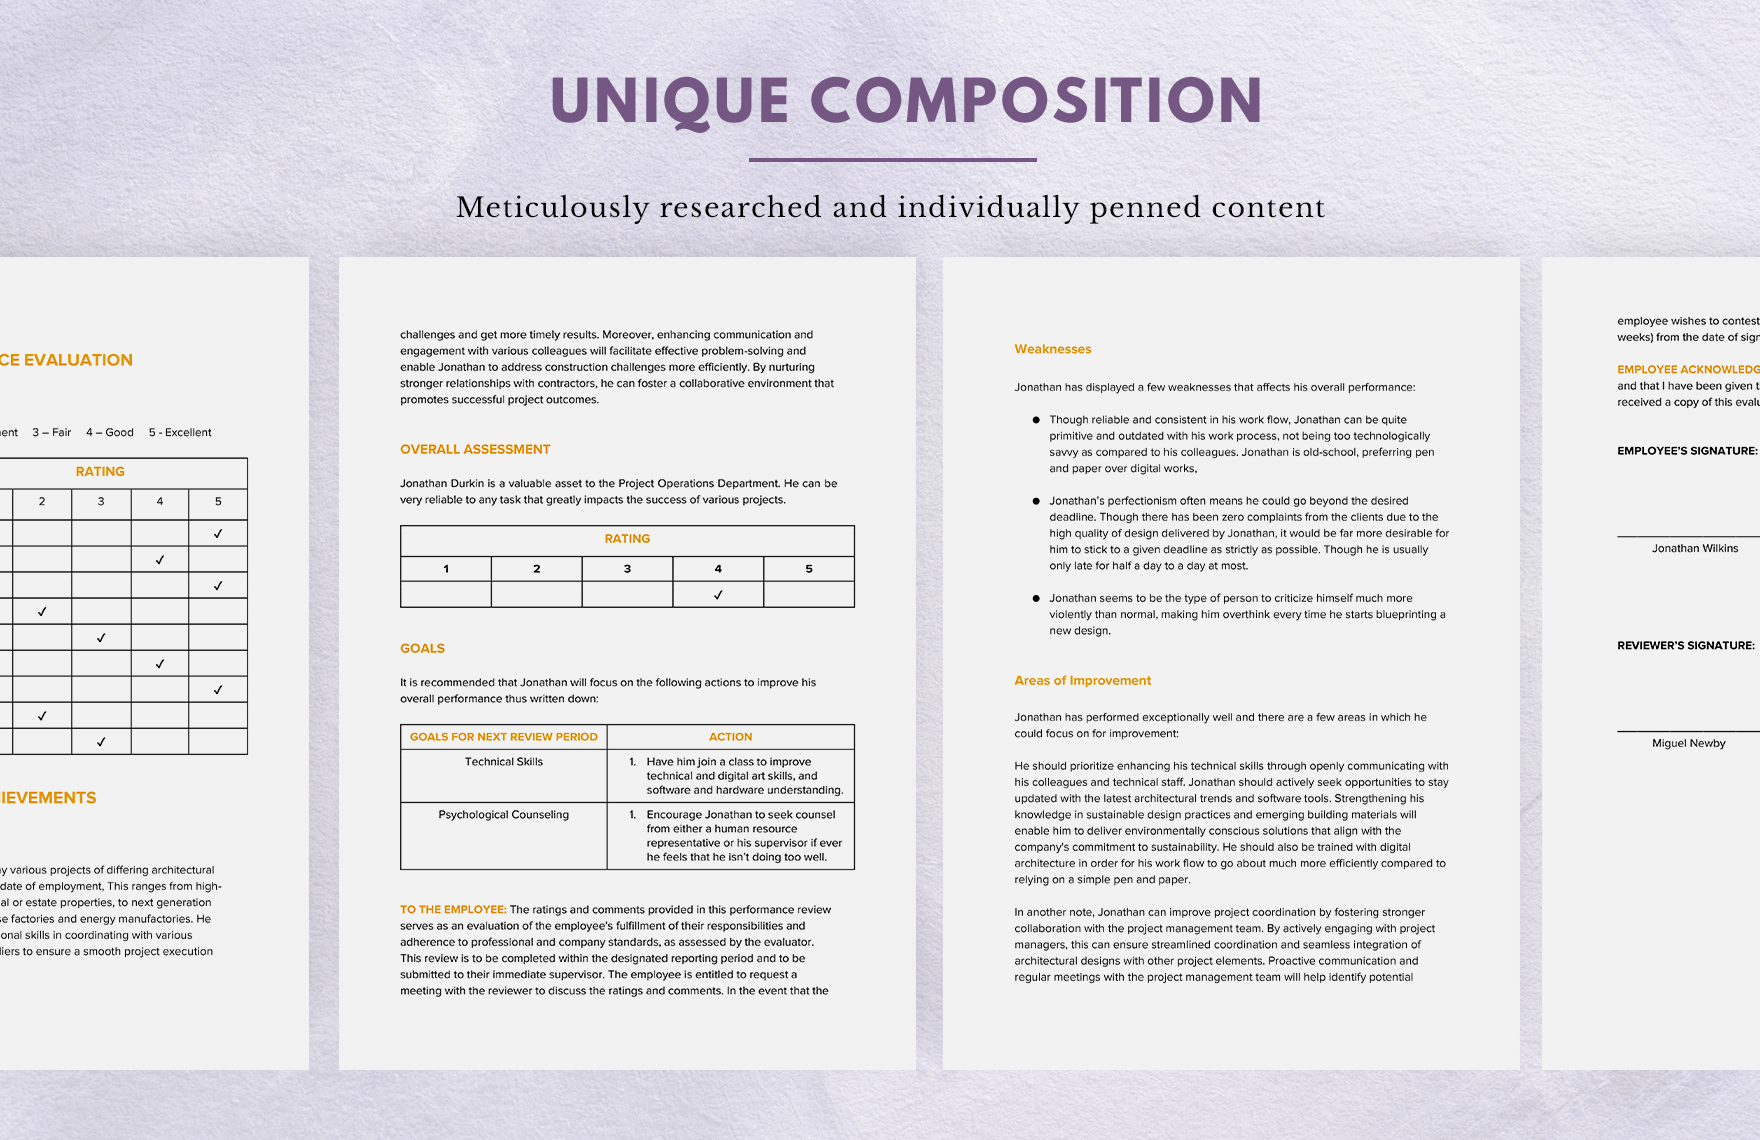 Introductory Period Performance Review Template